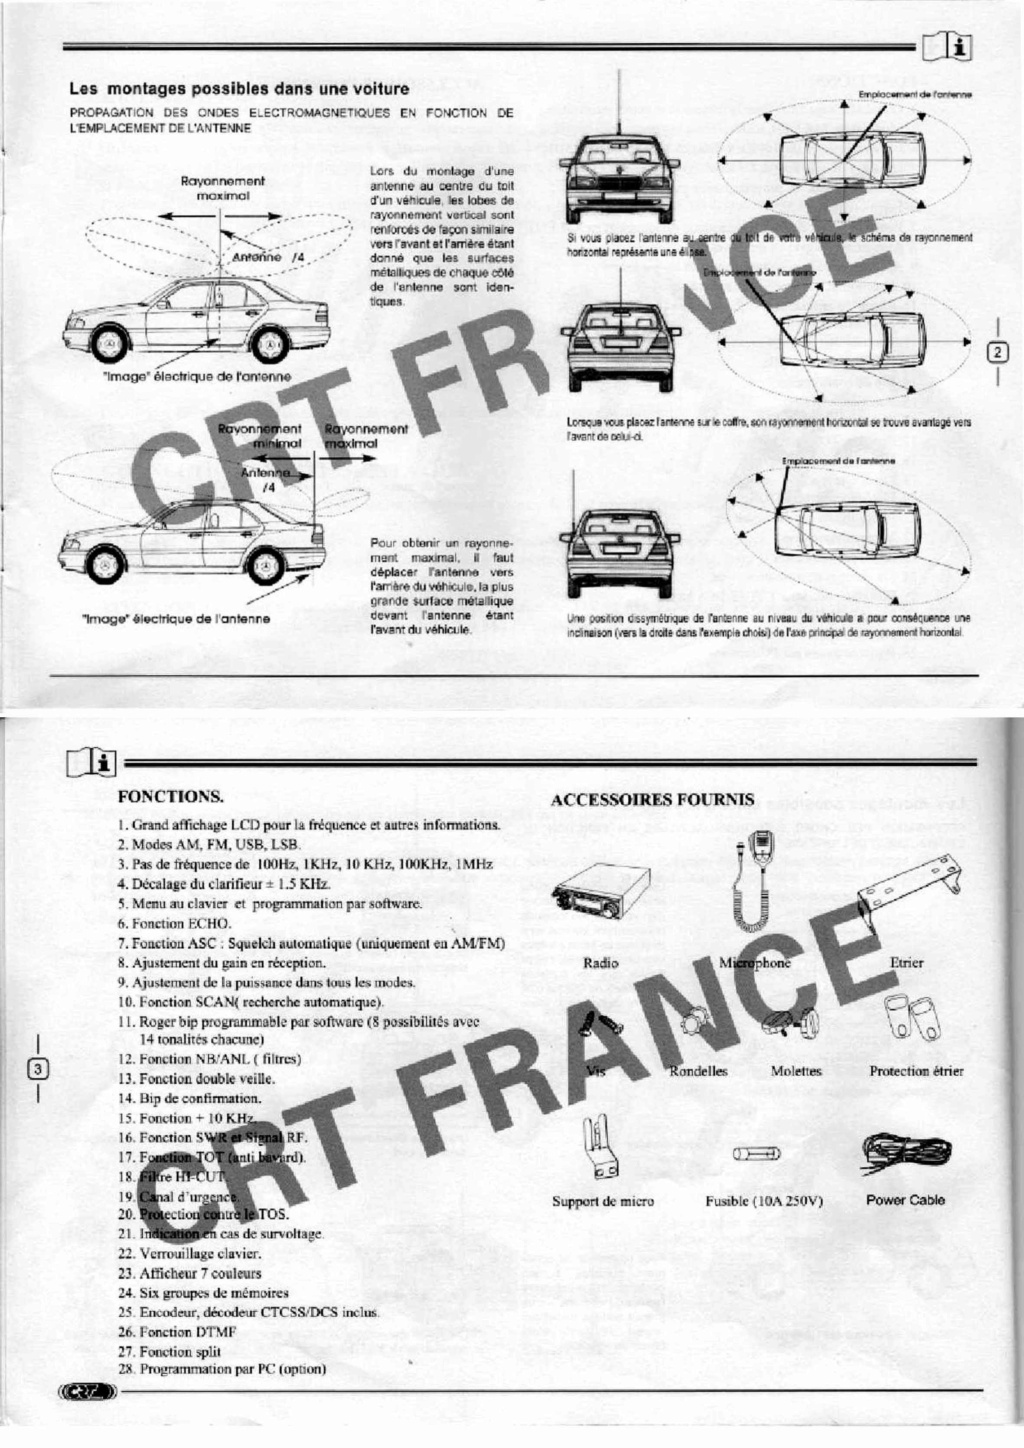 manuel - CRT SS 9900 v4 (Mobile) - Page 17 Feuill13